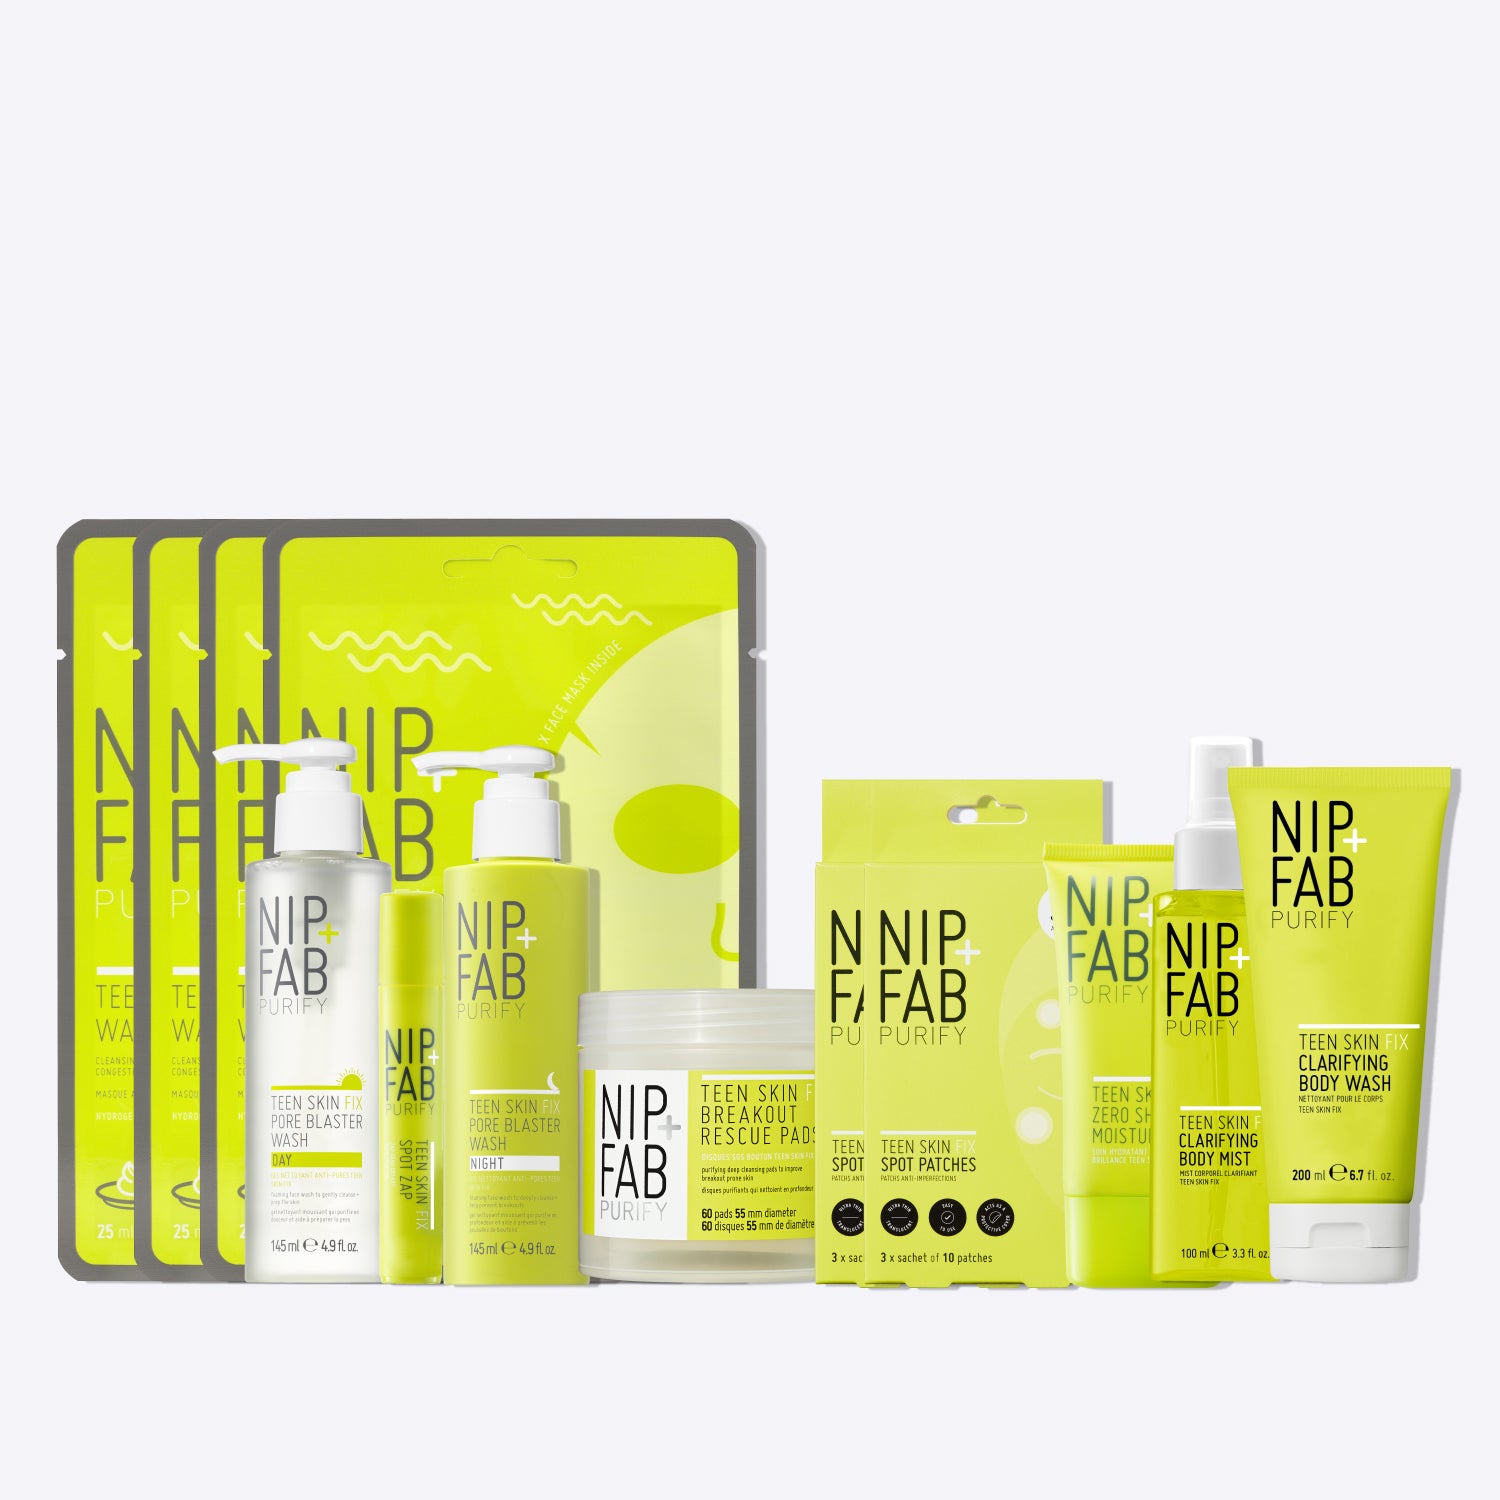 Teen Skin Fix Ultimate Face & Body Routine Kit